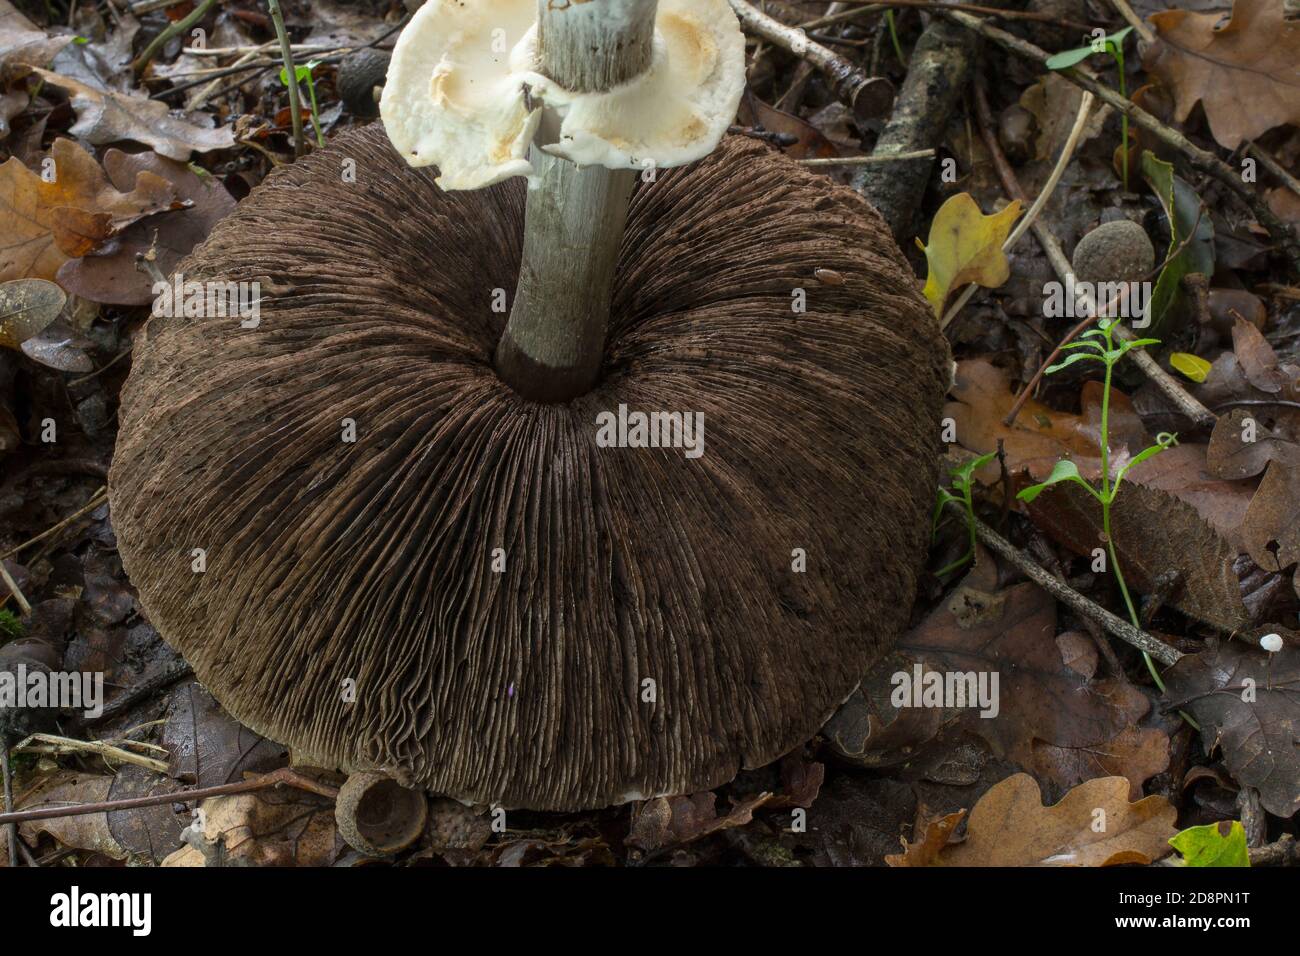 The darkened gills of an older Agaricus placomyces mushroom with the unattached stem in place. Stock Photo